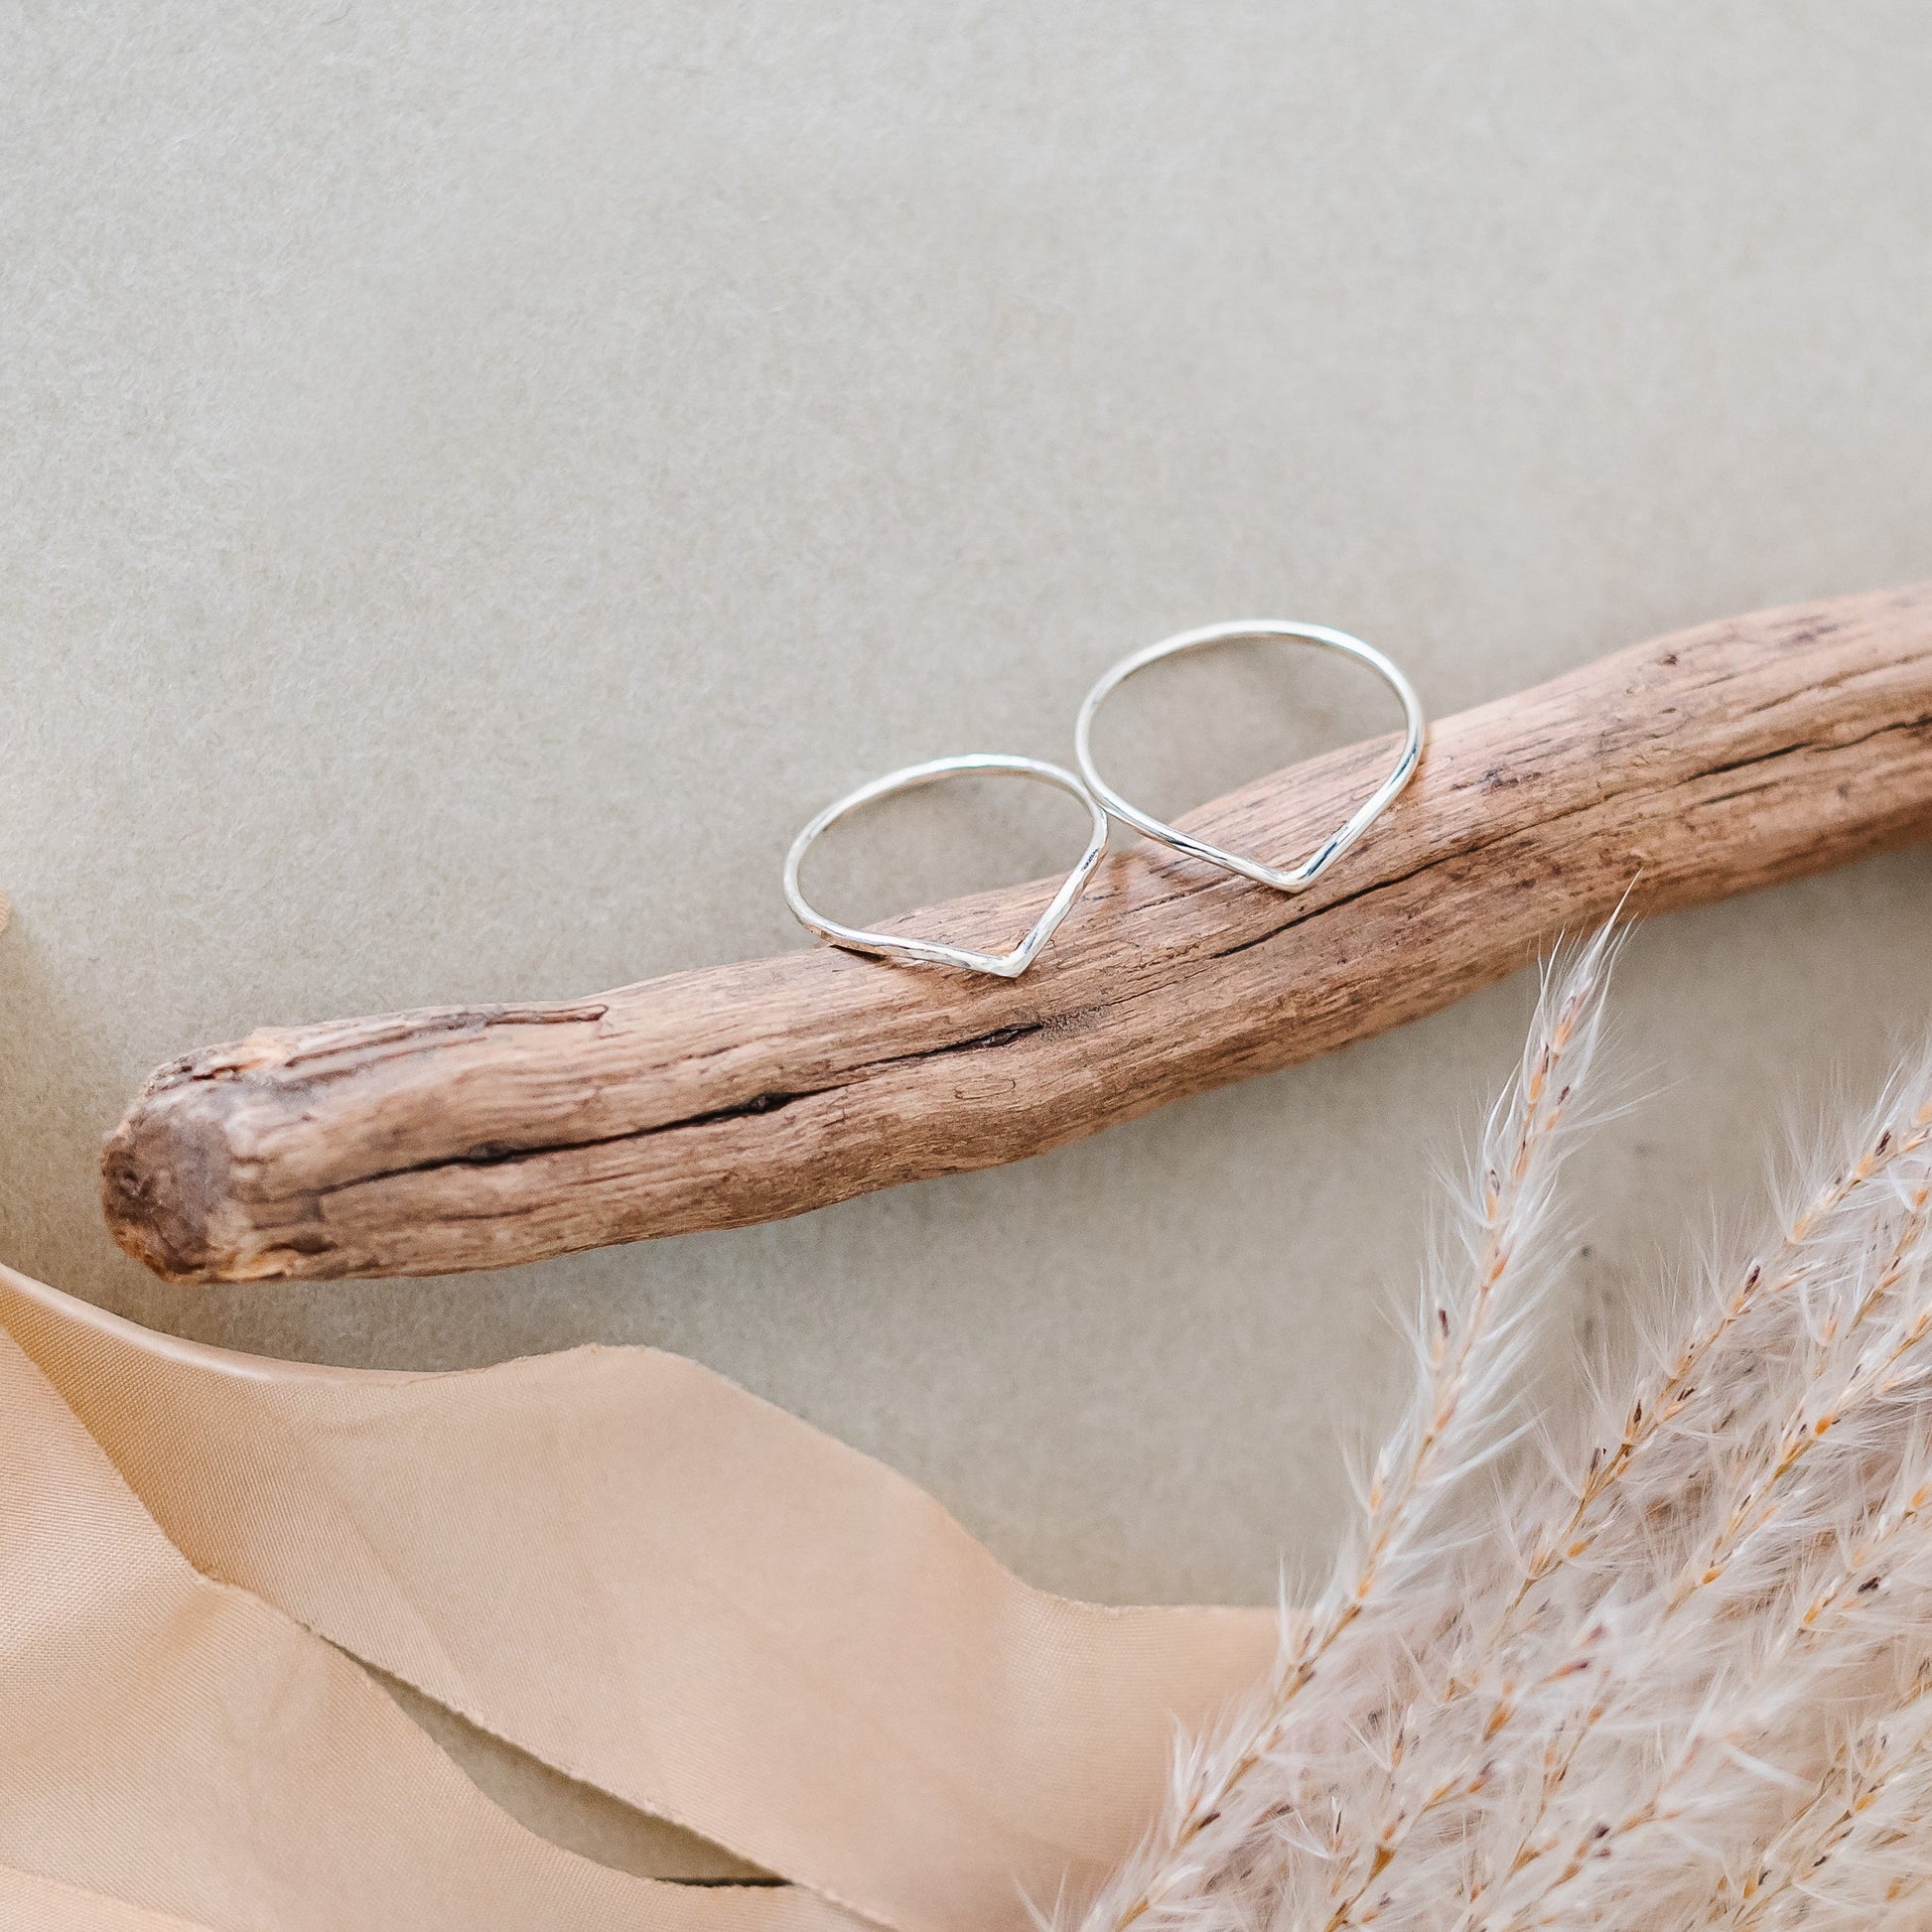 Two slim wishbones in 9ct white gold, one hammered one smooth. Wishbones are leaning on a piece of wood, with dried flowers and ribbon in the background